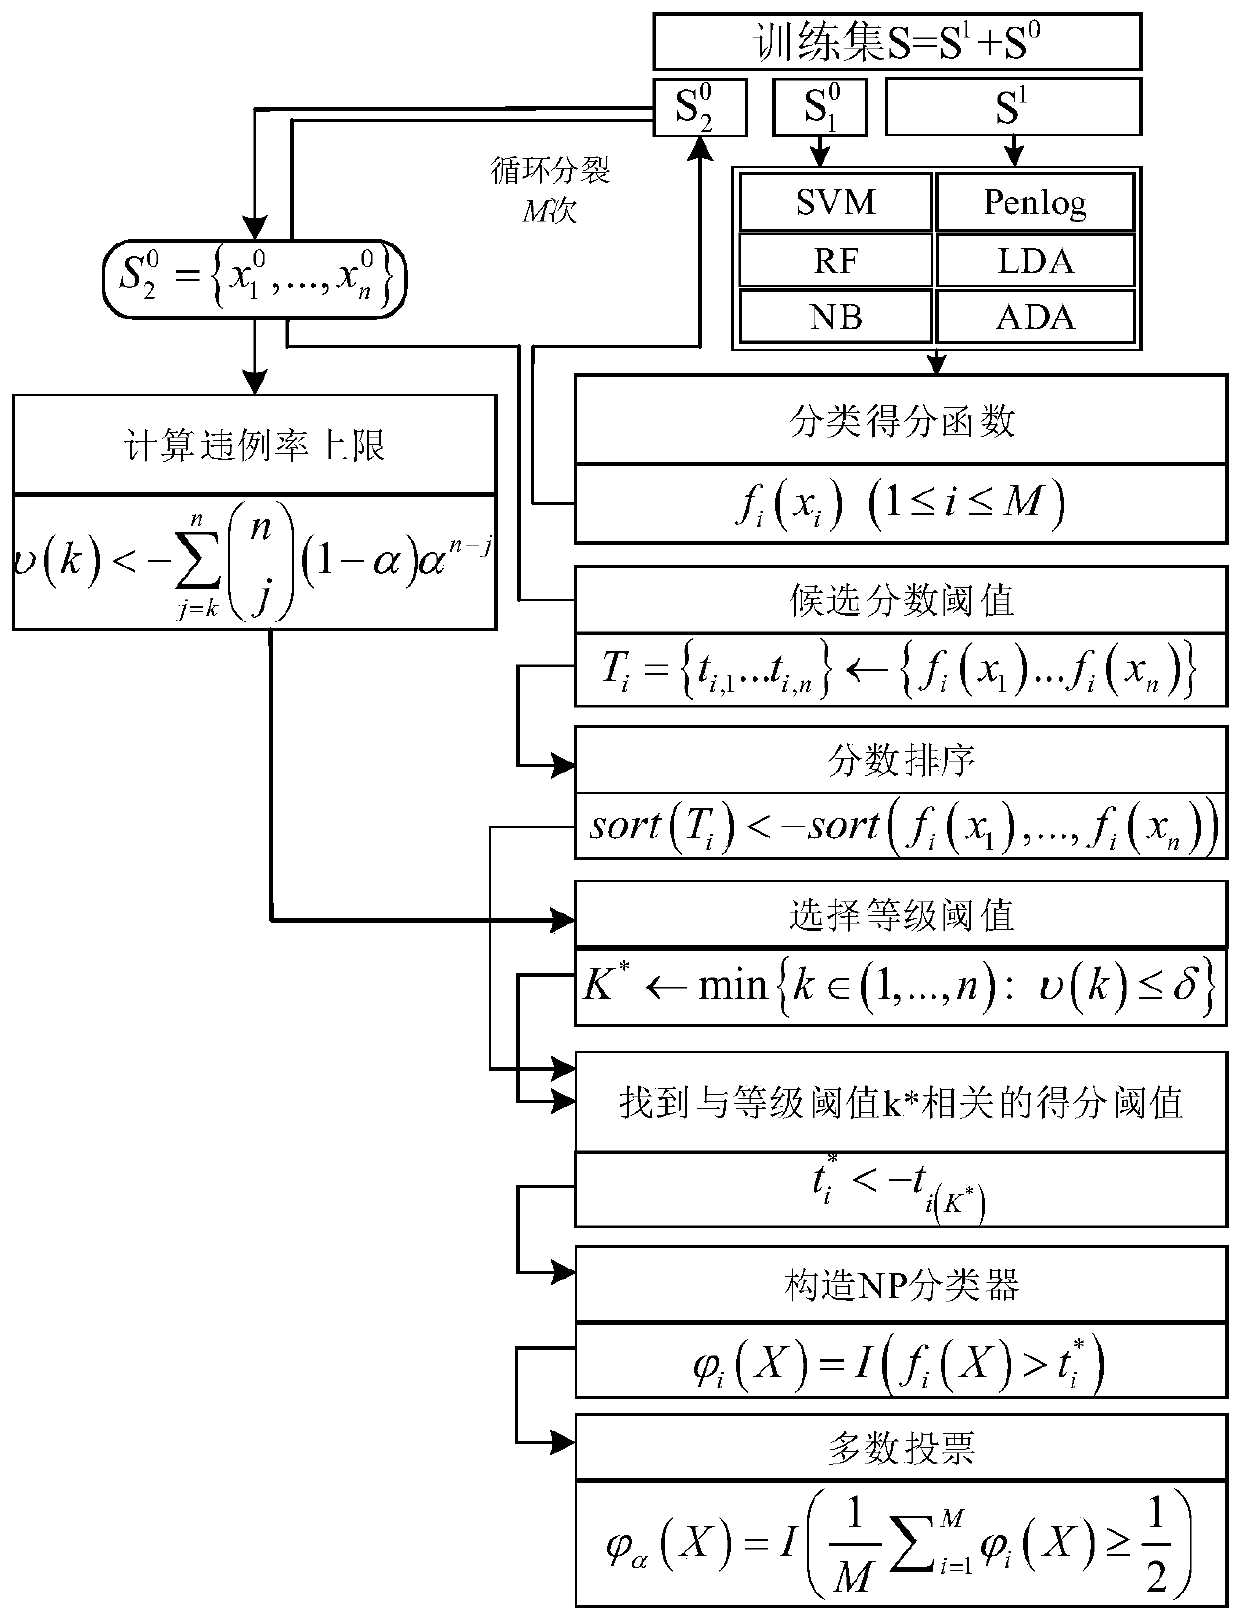 Dynamic security misclassification constraint method for power system based on umbrella algorithm